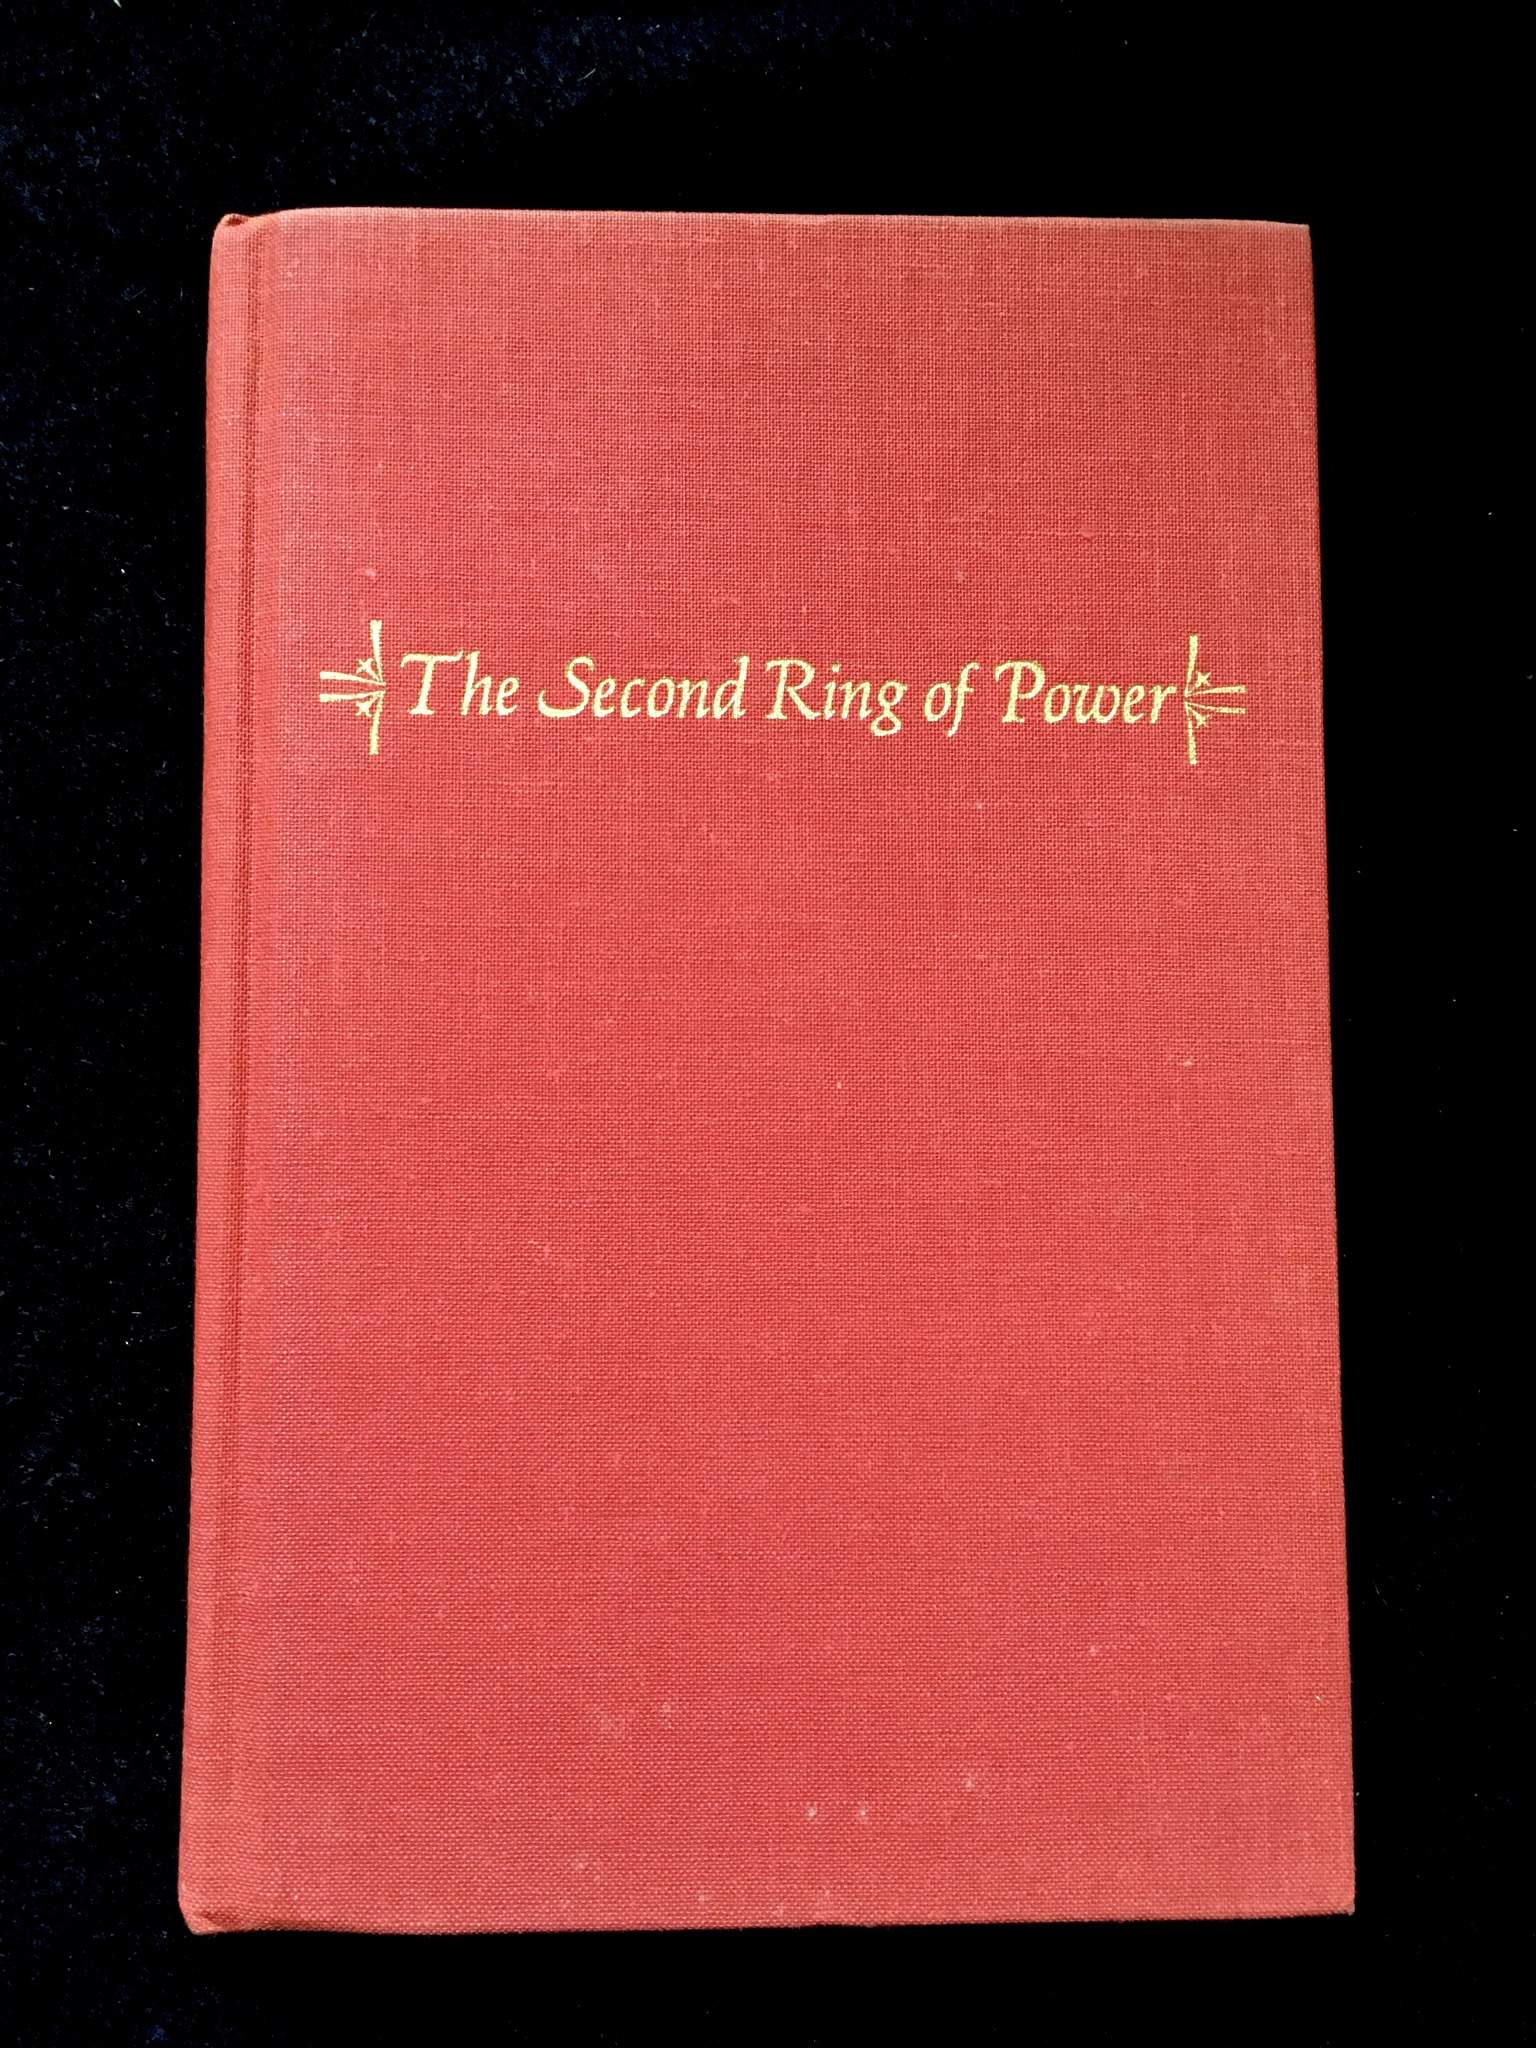 The Second Ring of Power by Carlos Castaneda